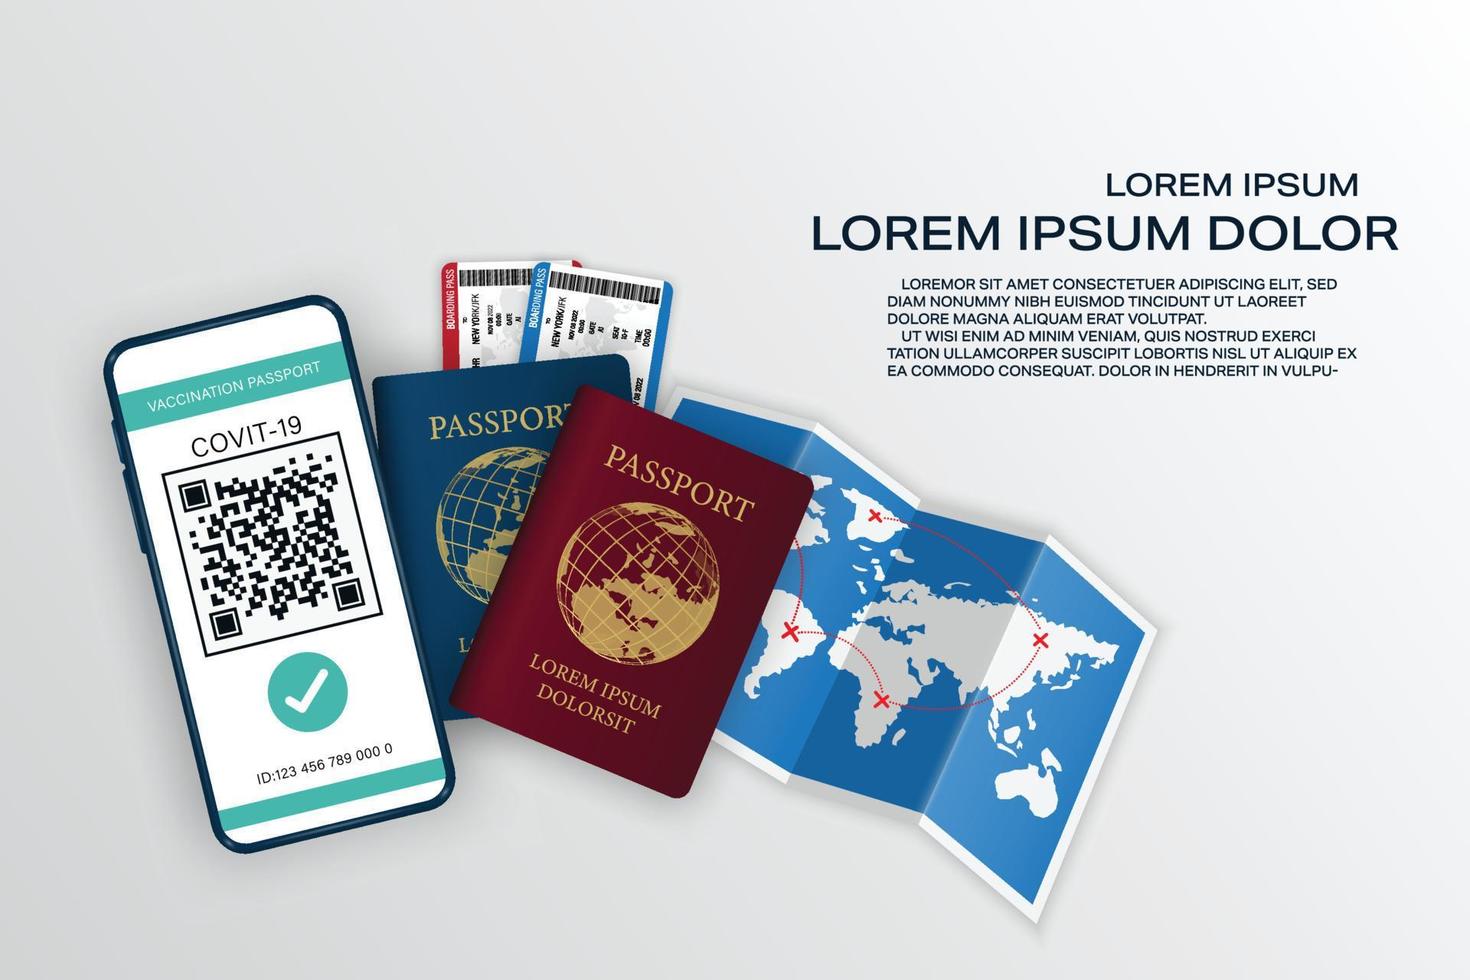 Vector Digital certificate vaccine Covic-19 with QR code. Online heart passsport concept. Save travel documents. Smartphone, World map, Airplane ticket and passport booking.